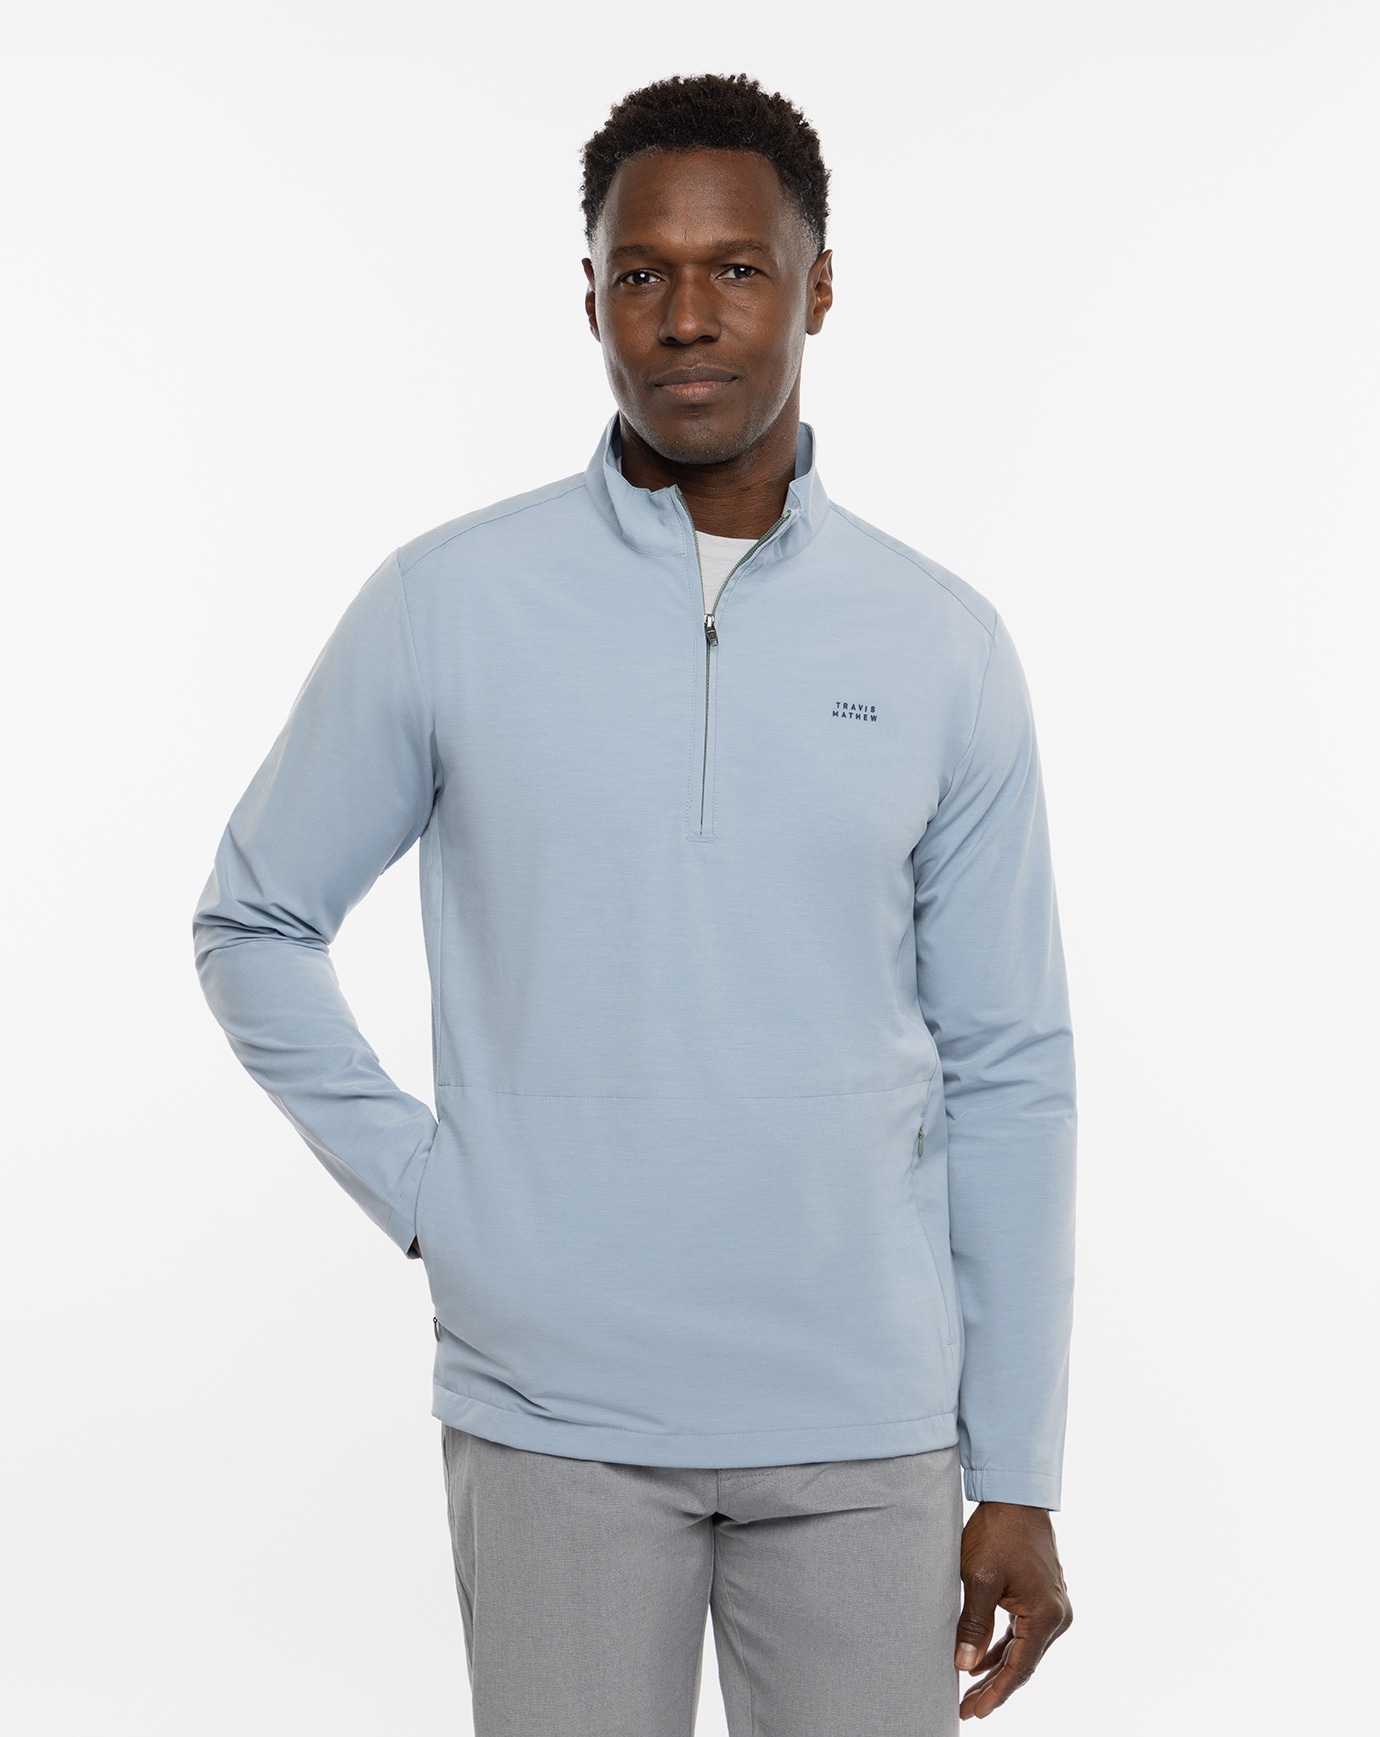 Related Product - TWIN FIN QUARTER ZIP